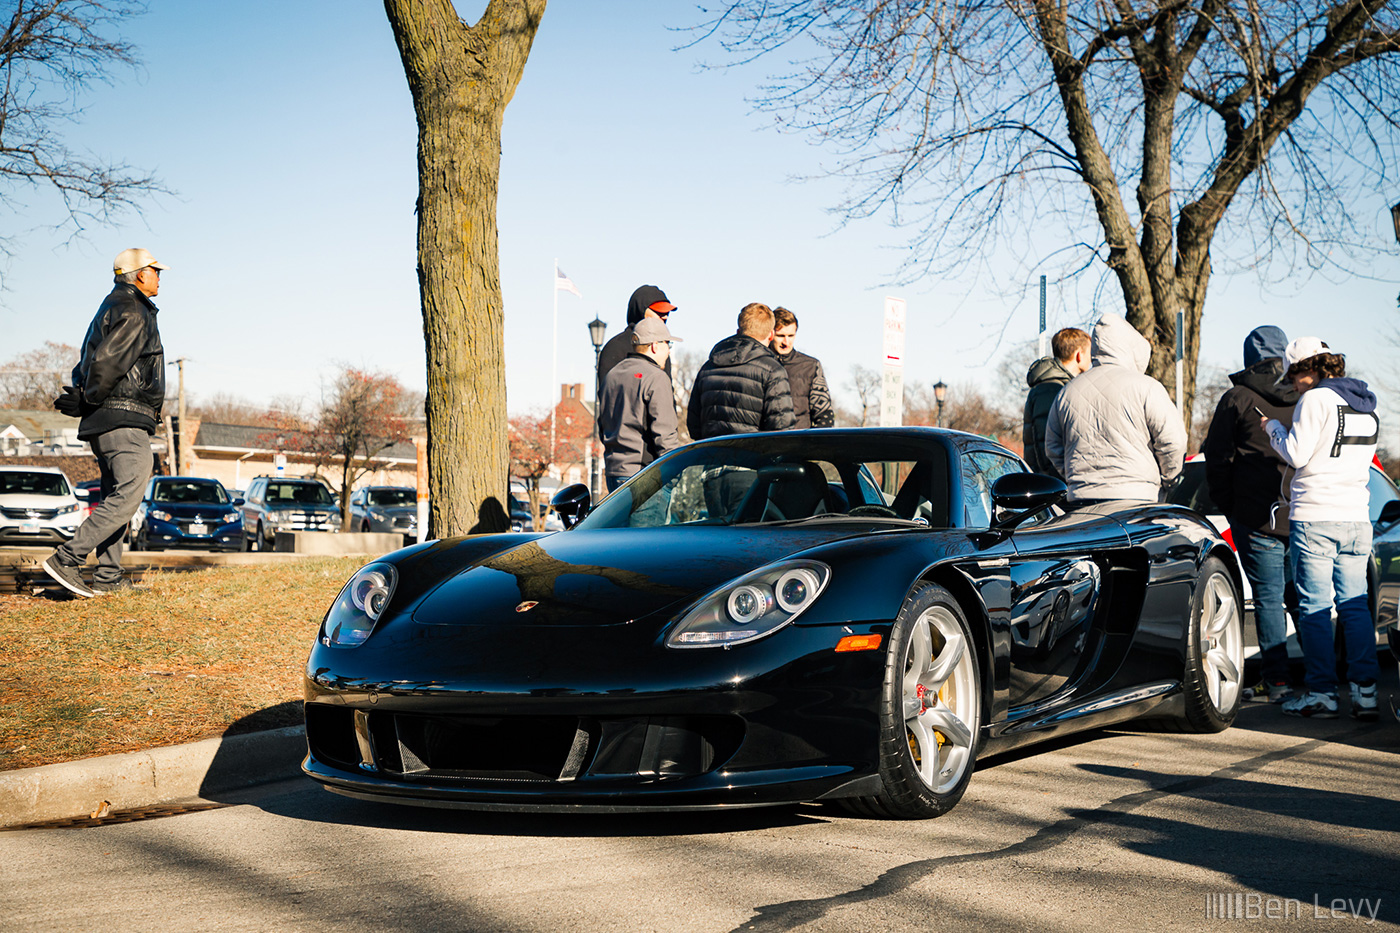 Black Porsche Carrera GT at Toy Drive in Hinsdale, IL